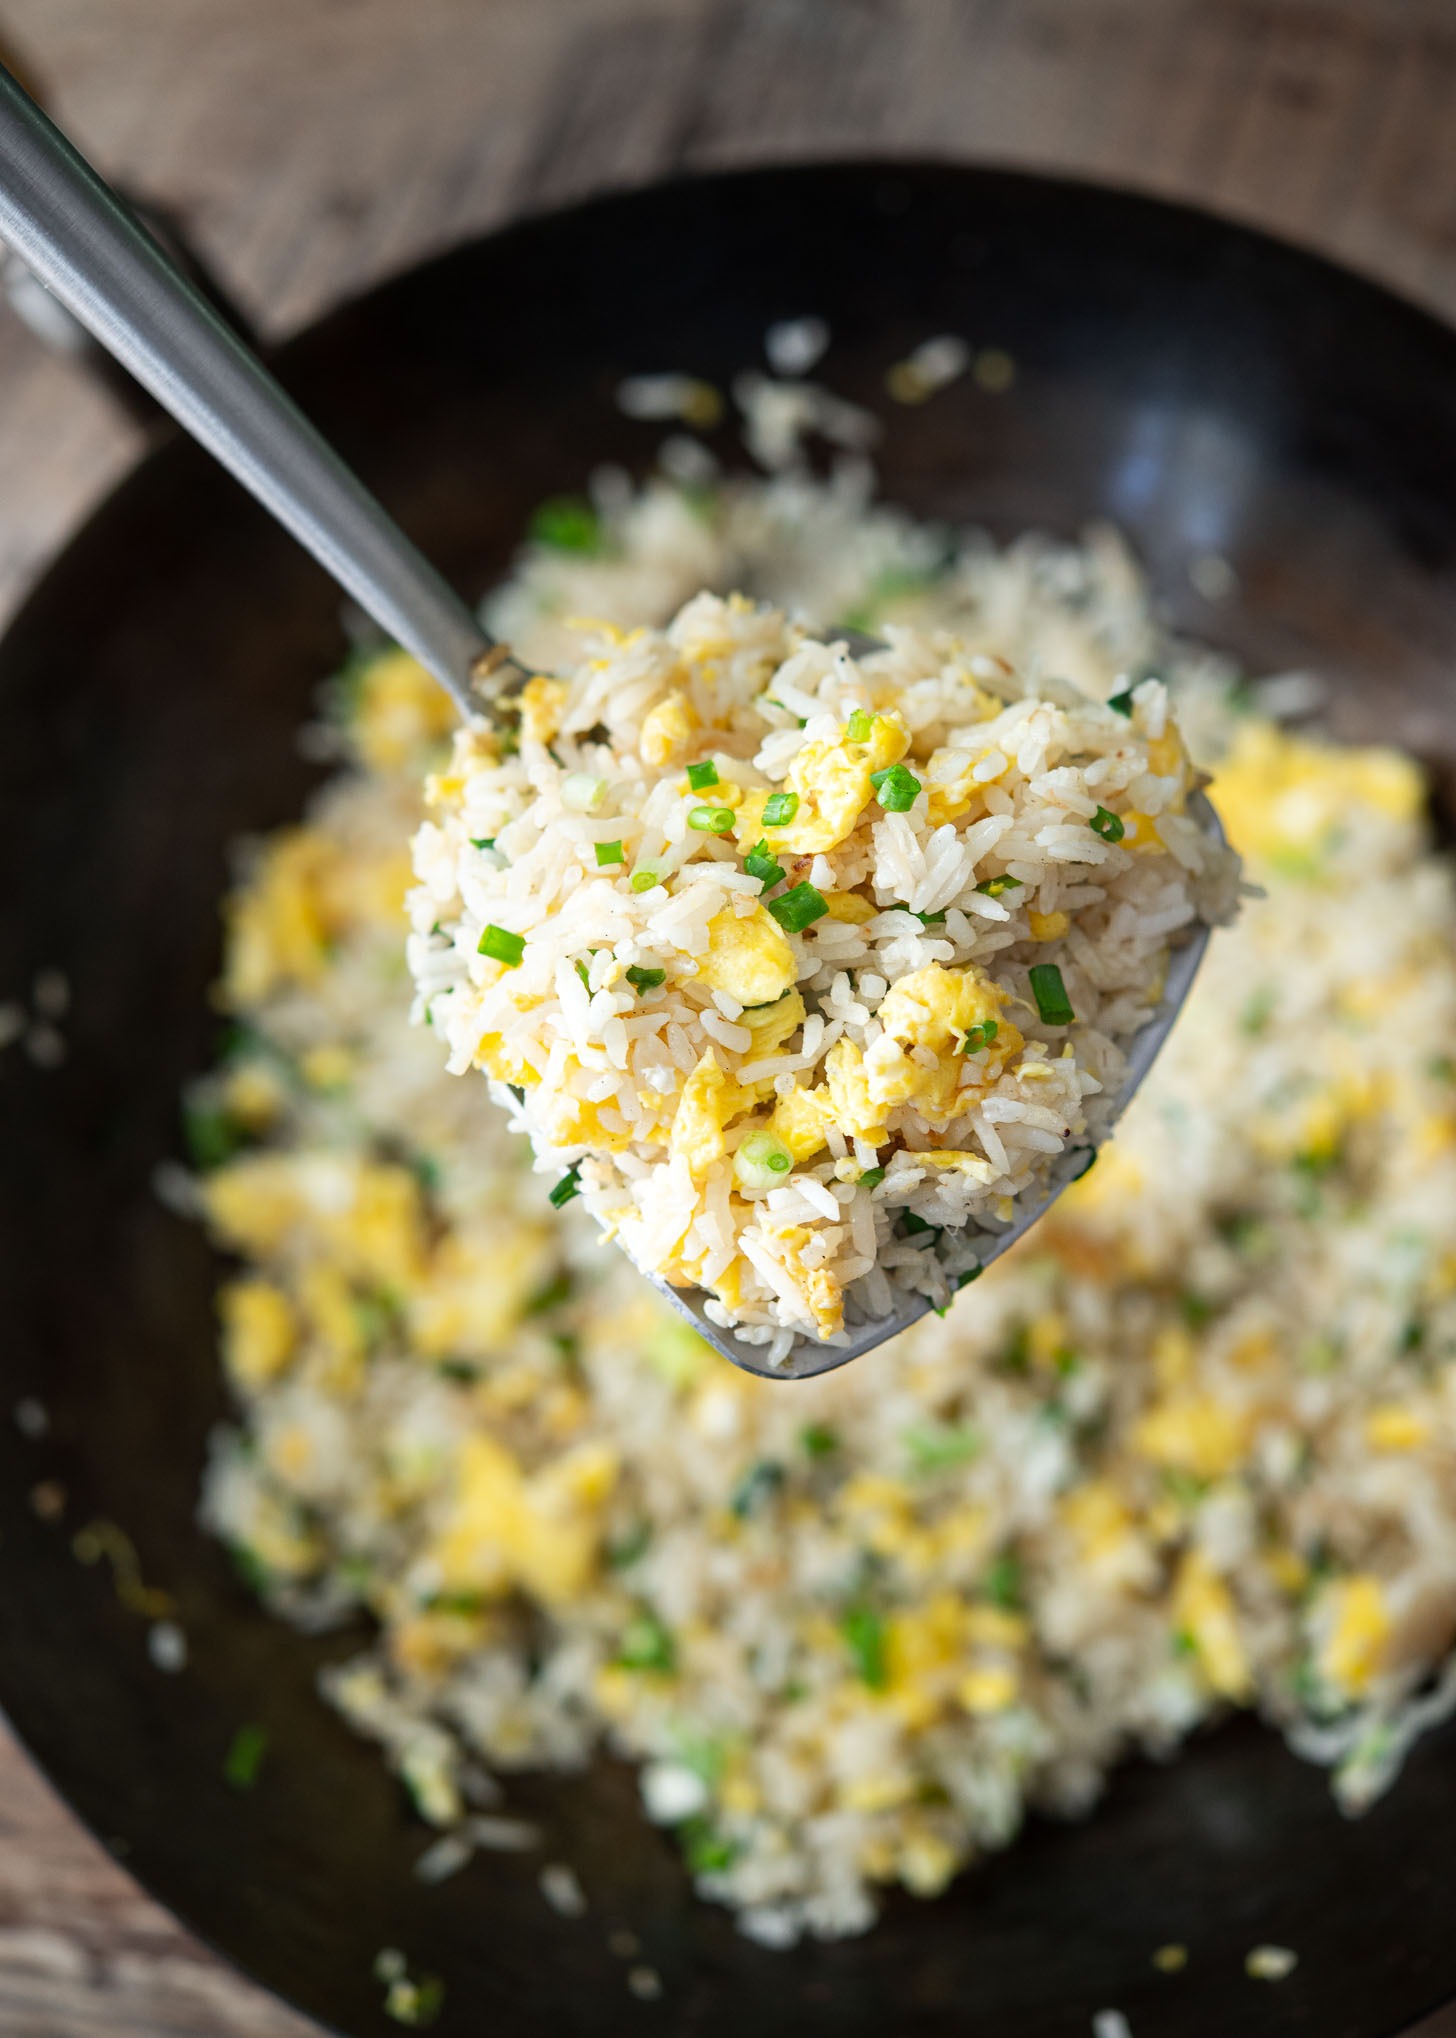 A spatula is holding up some of egg fried rice above the rest of fried rice.